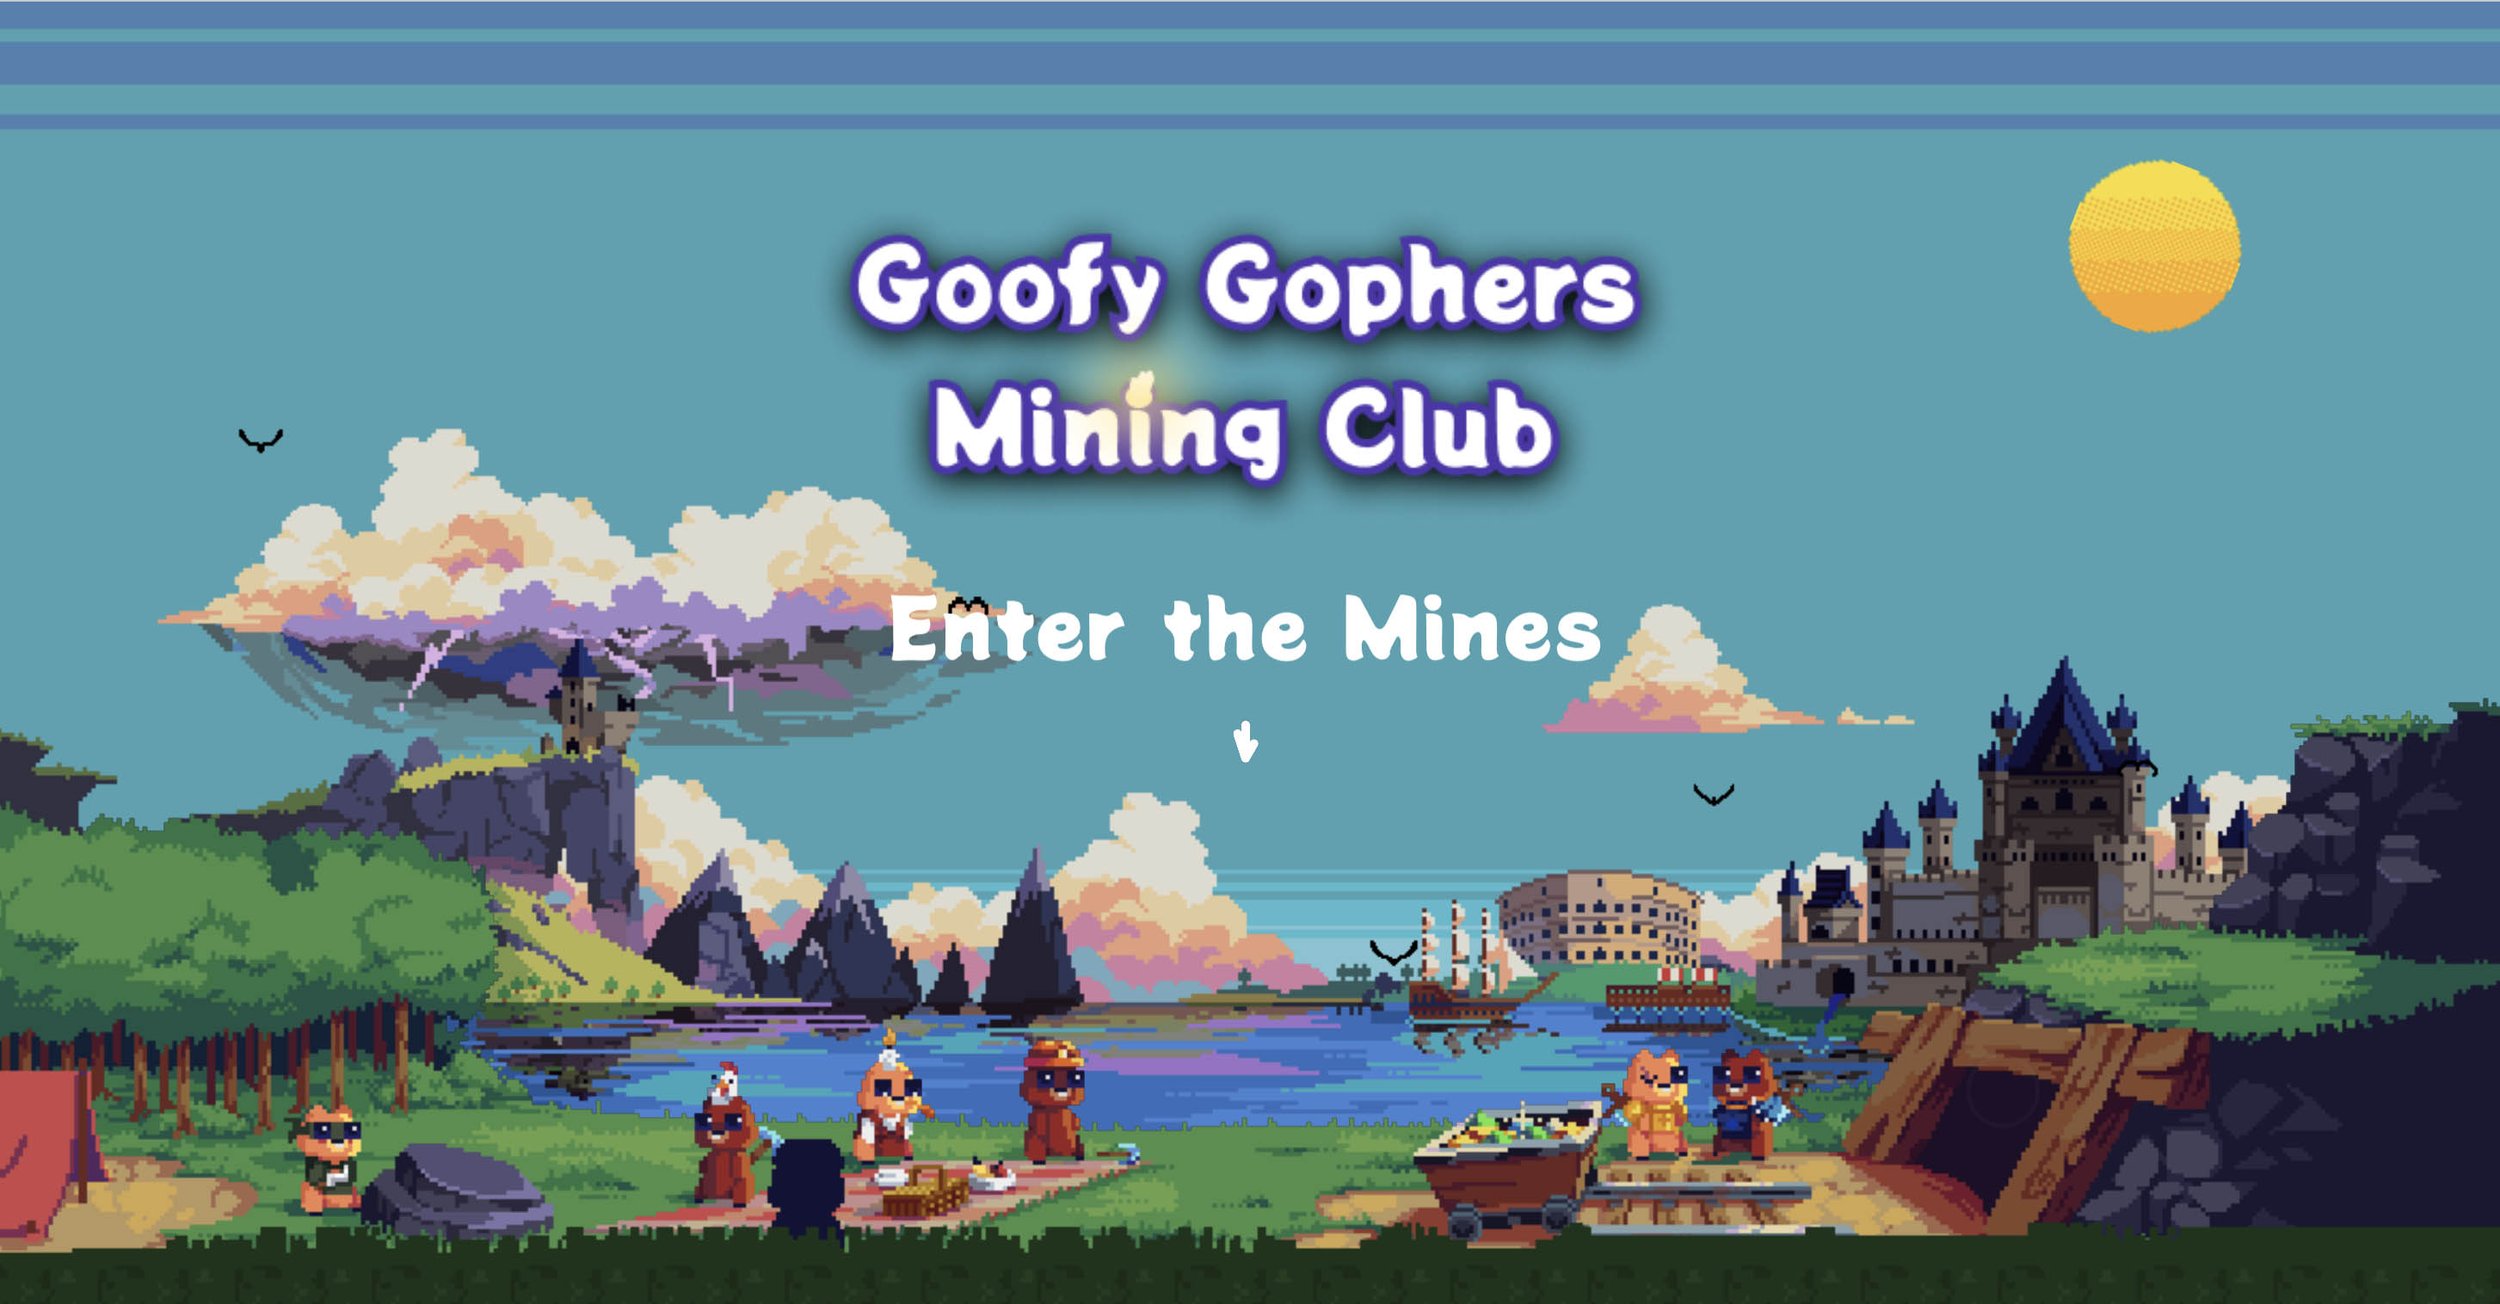 NFT's with Real Utility: Goofy Gophers Mining Club — DC Mining